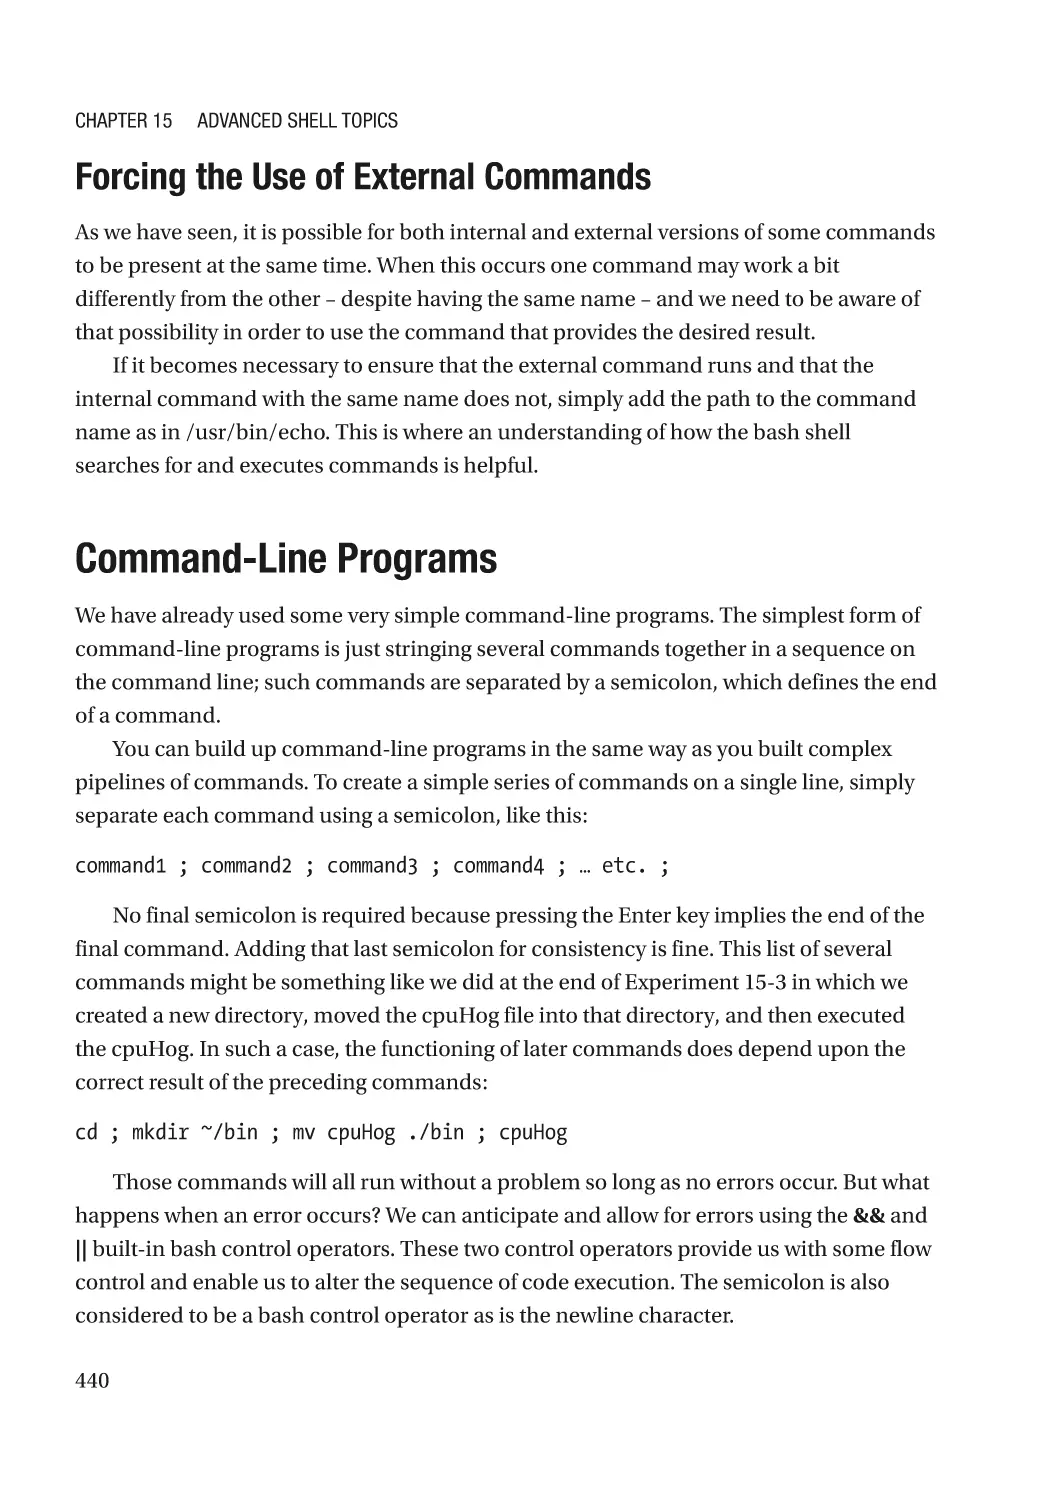 Forcing the Use of External Commands
Command-Line Programs